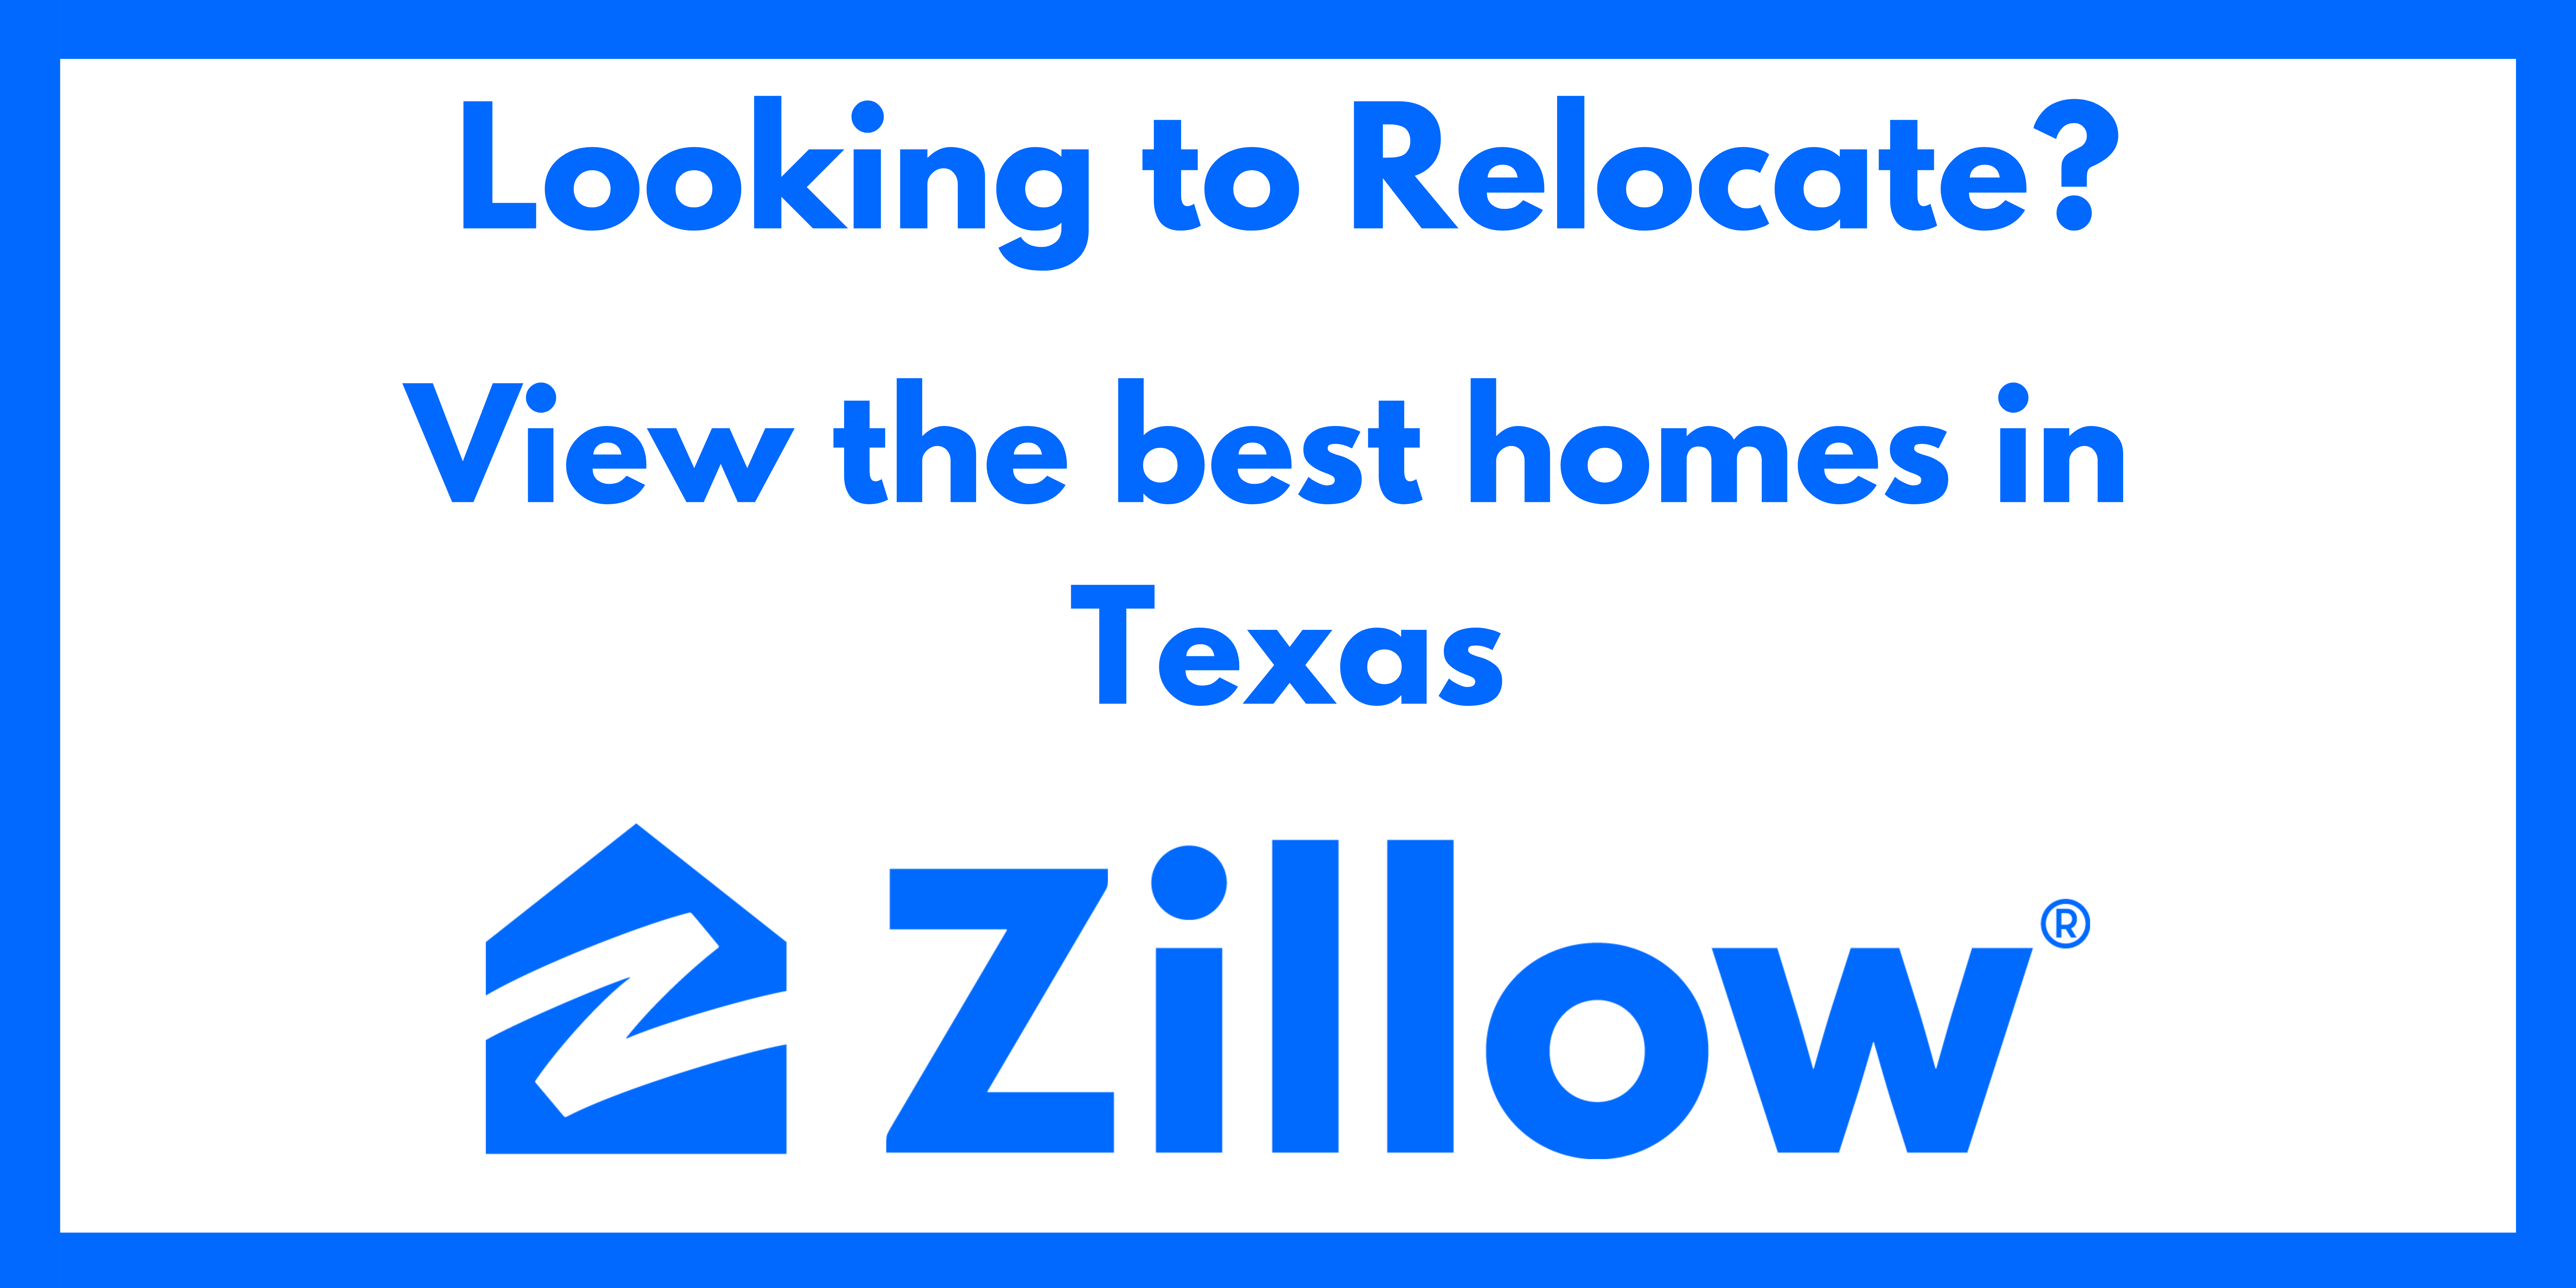 View the best homes for in Texas banner